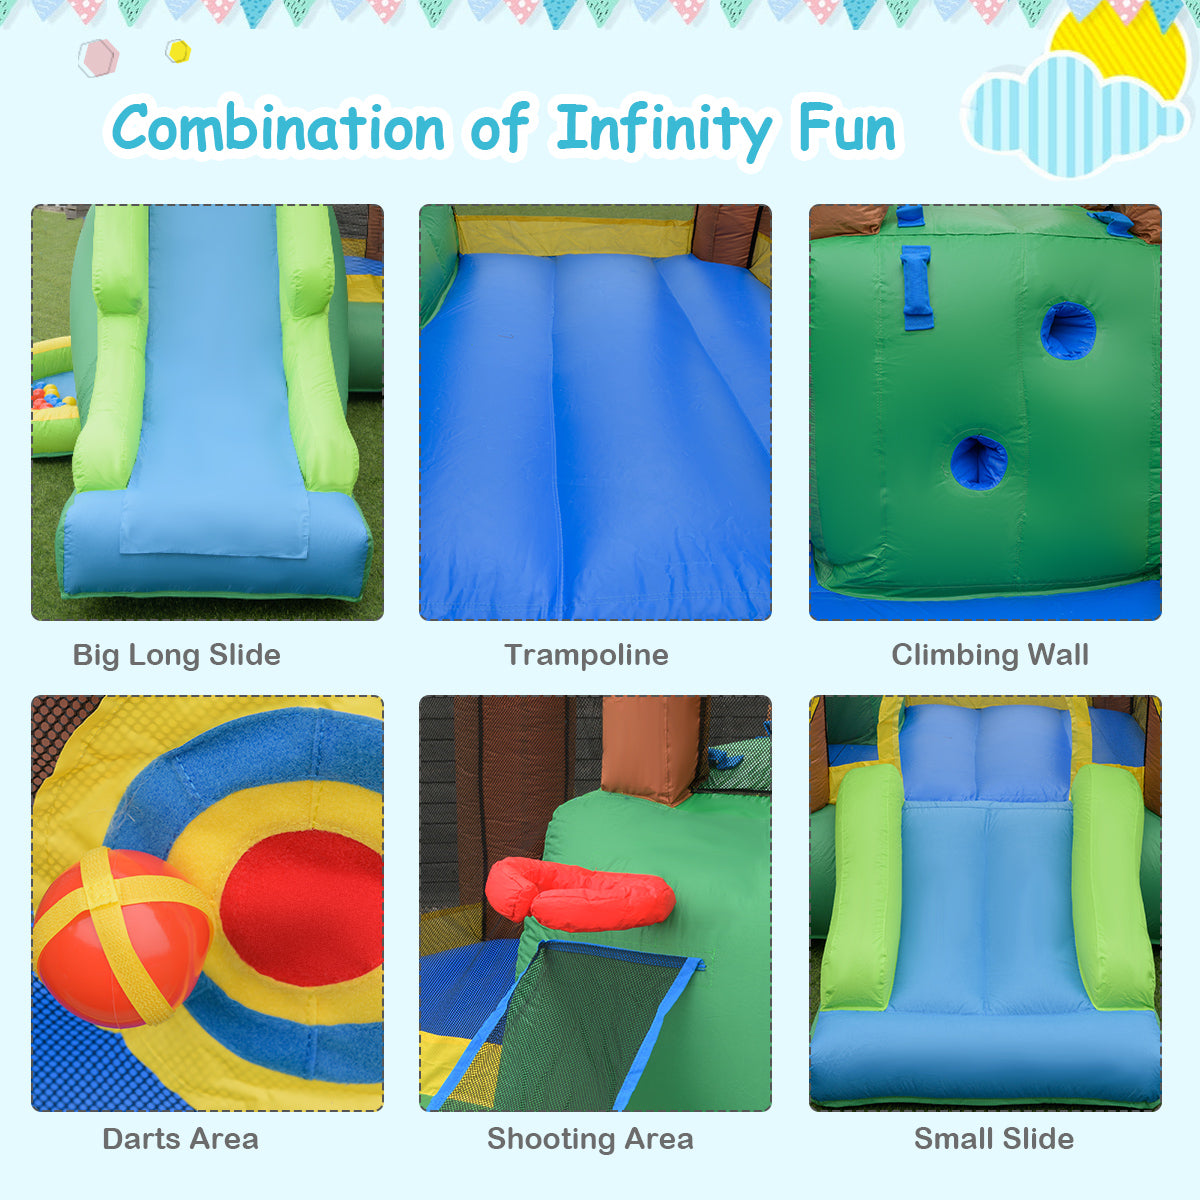 Infinite Fun Combination: Experience endless excitement with our inflatable bounce house featuring a built-in trampoline, 2 slides, a climbing wall, a shooting area, and a dart area. Your children will have a blast with the variety of activities it offers, making it suitable for both indoor and outdoor play, no matter the season.